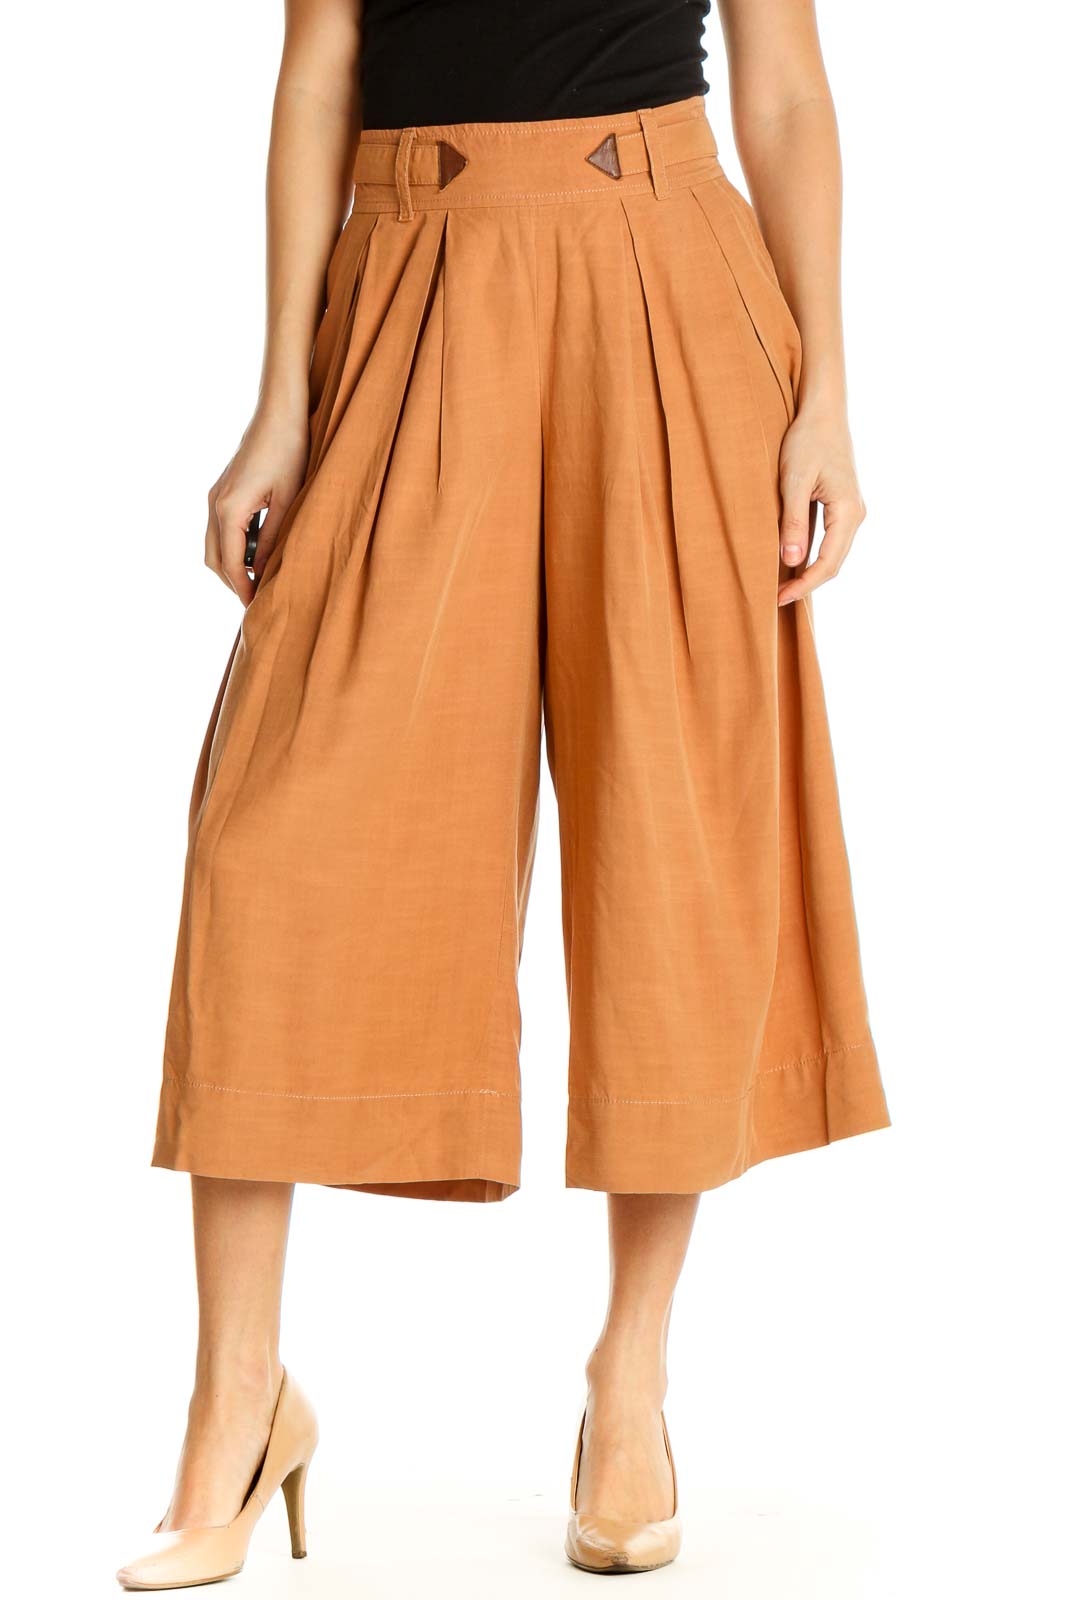 Orange Solid Casual Culottes Pants Front